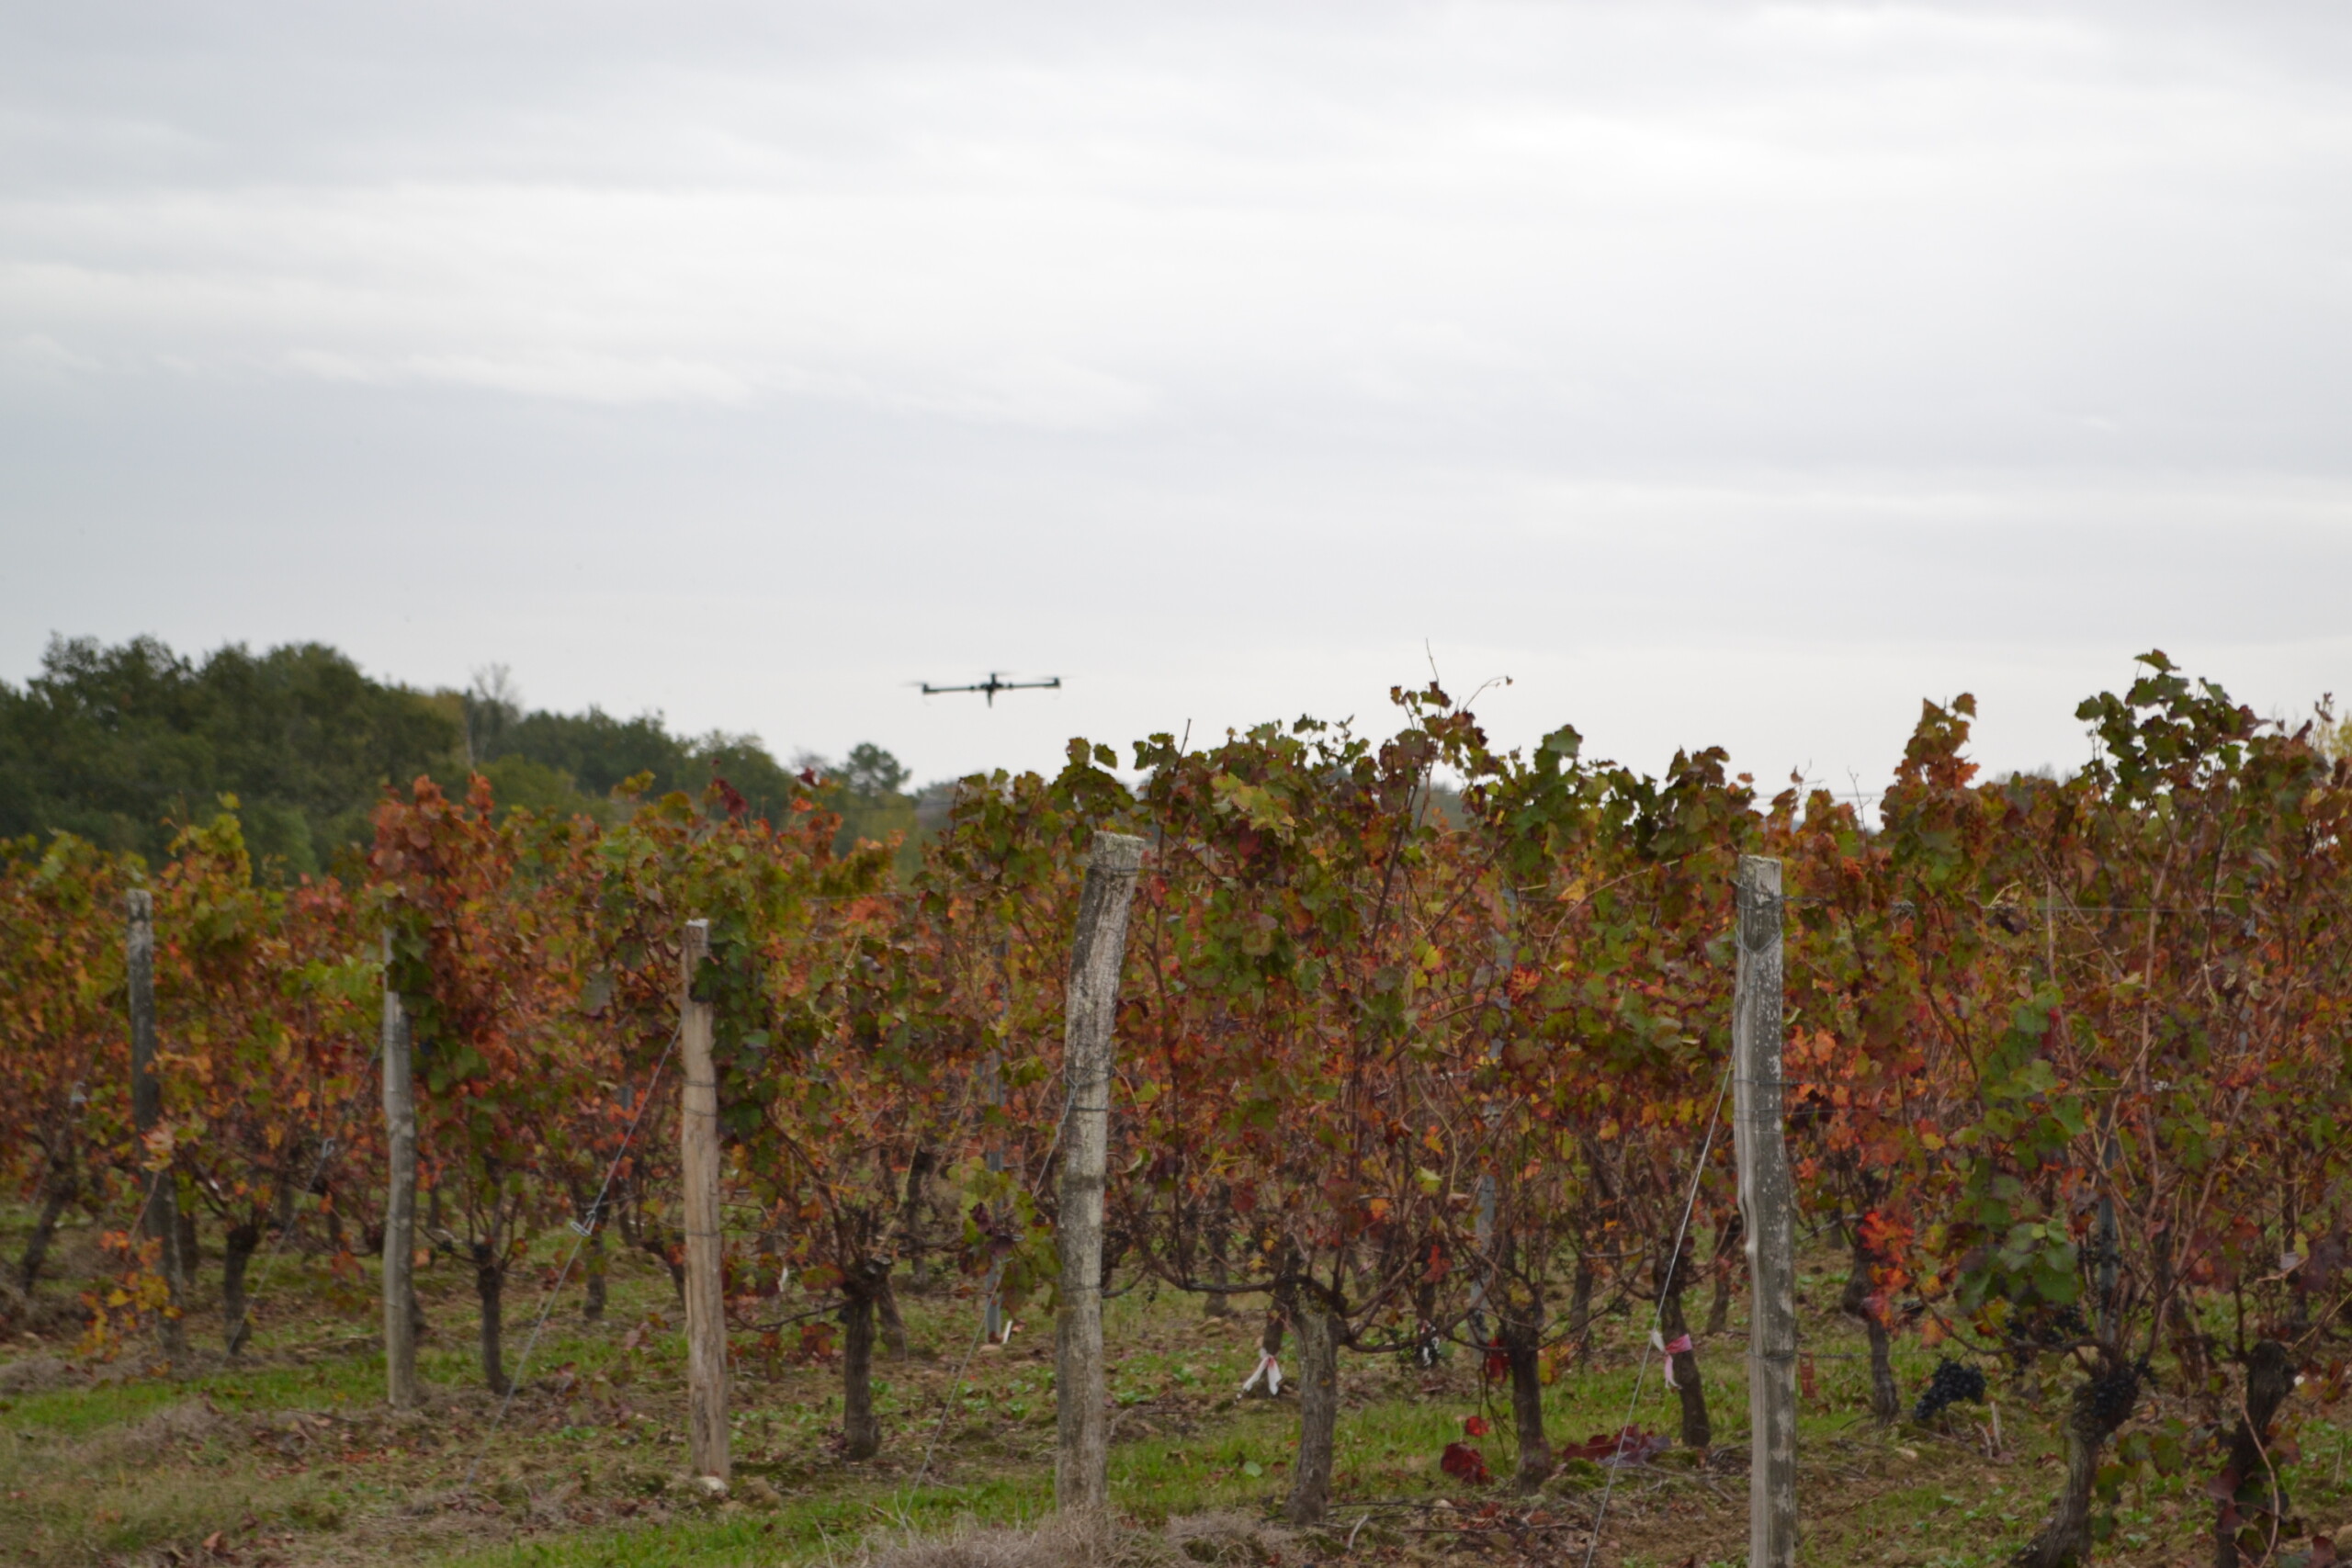 Drone flying demonstration in the vineyard